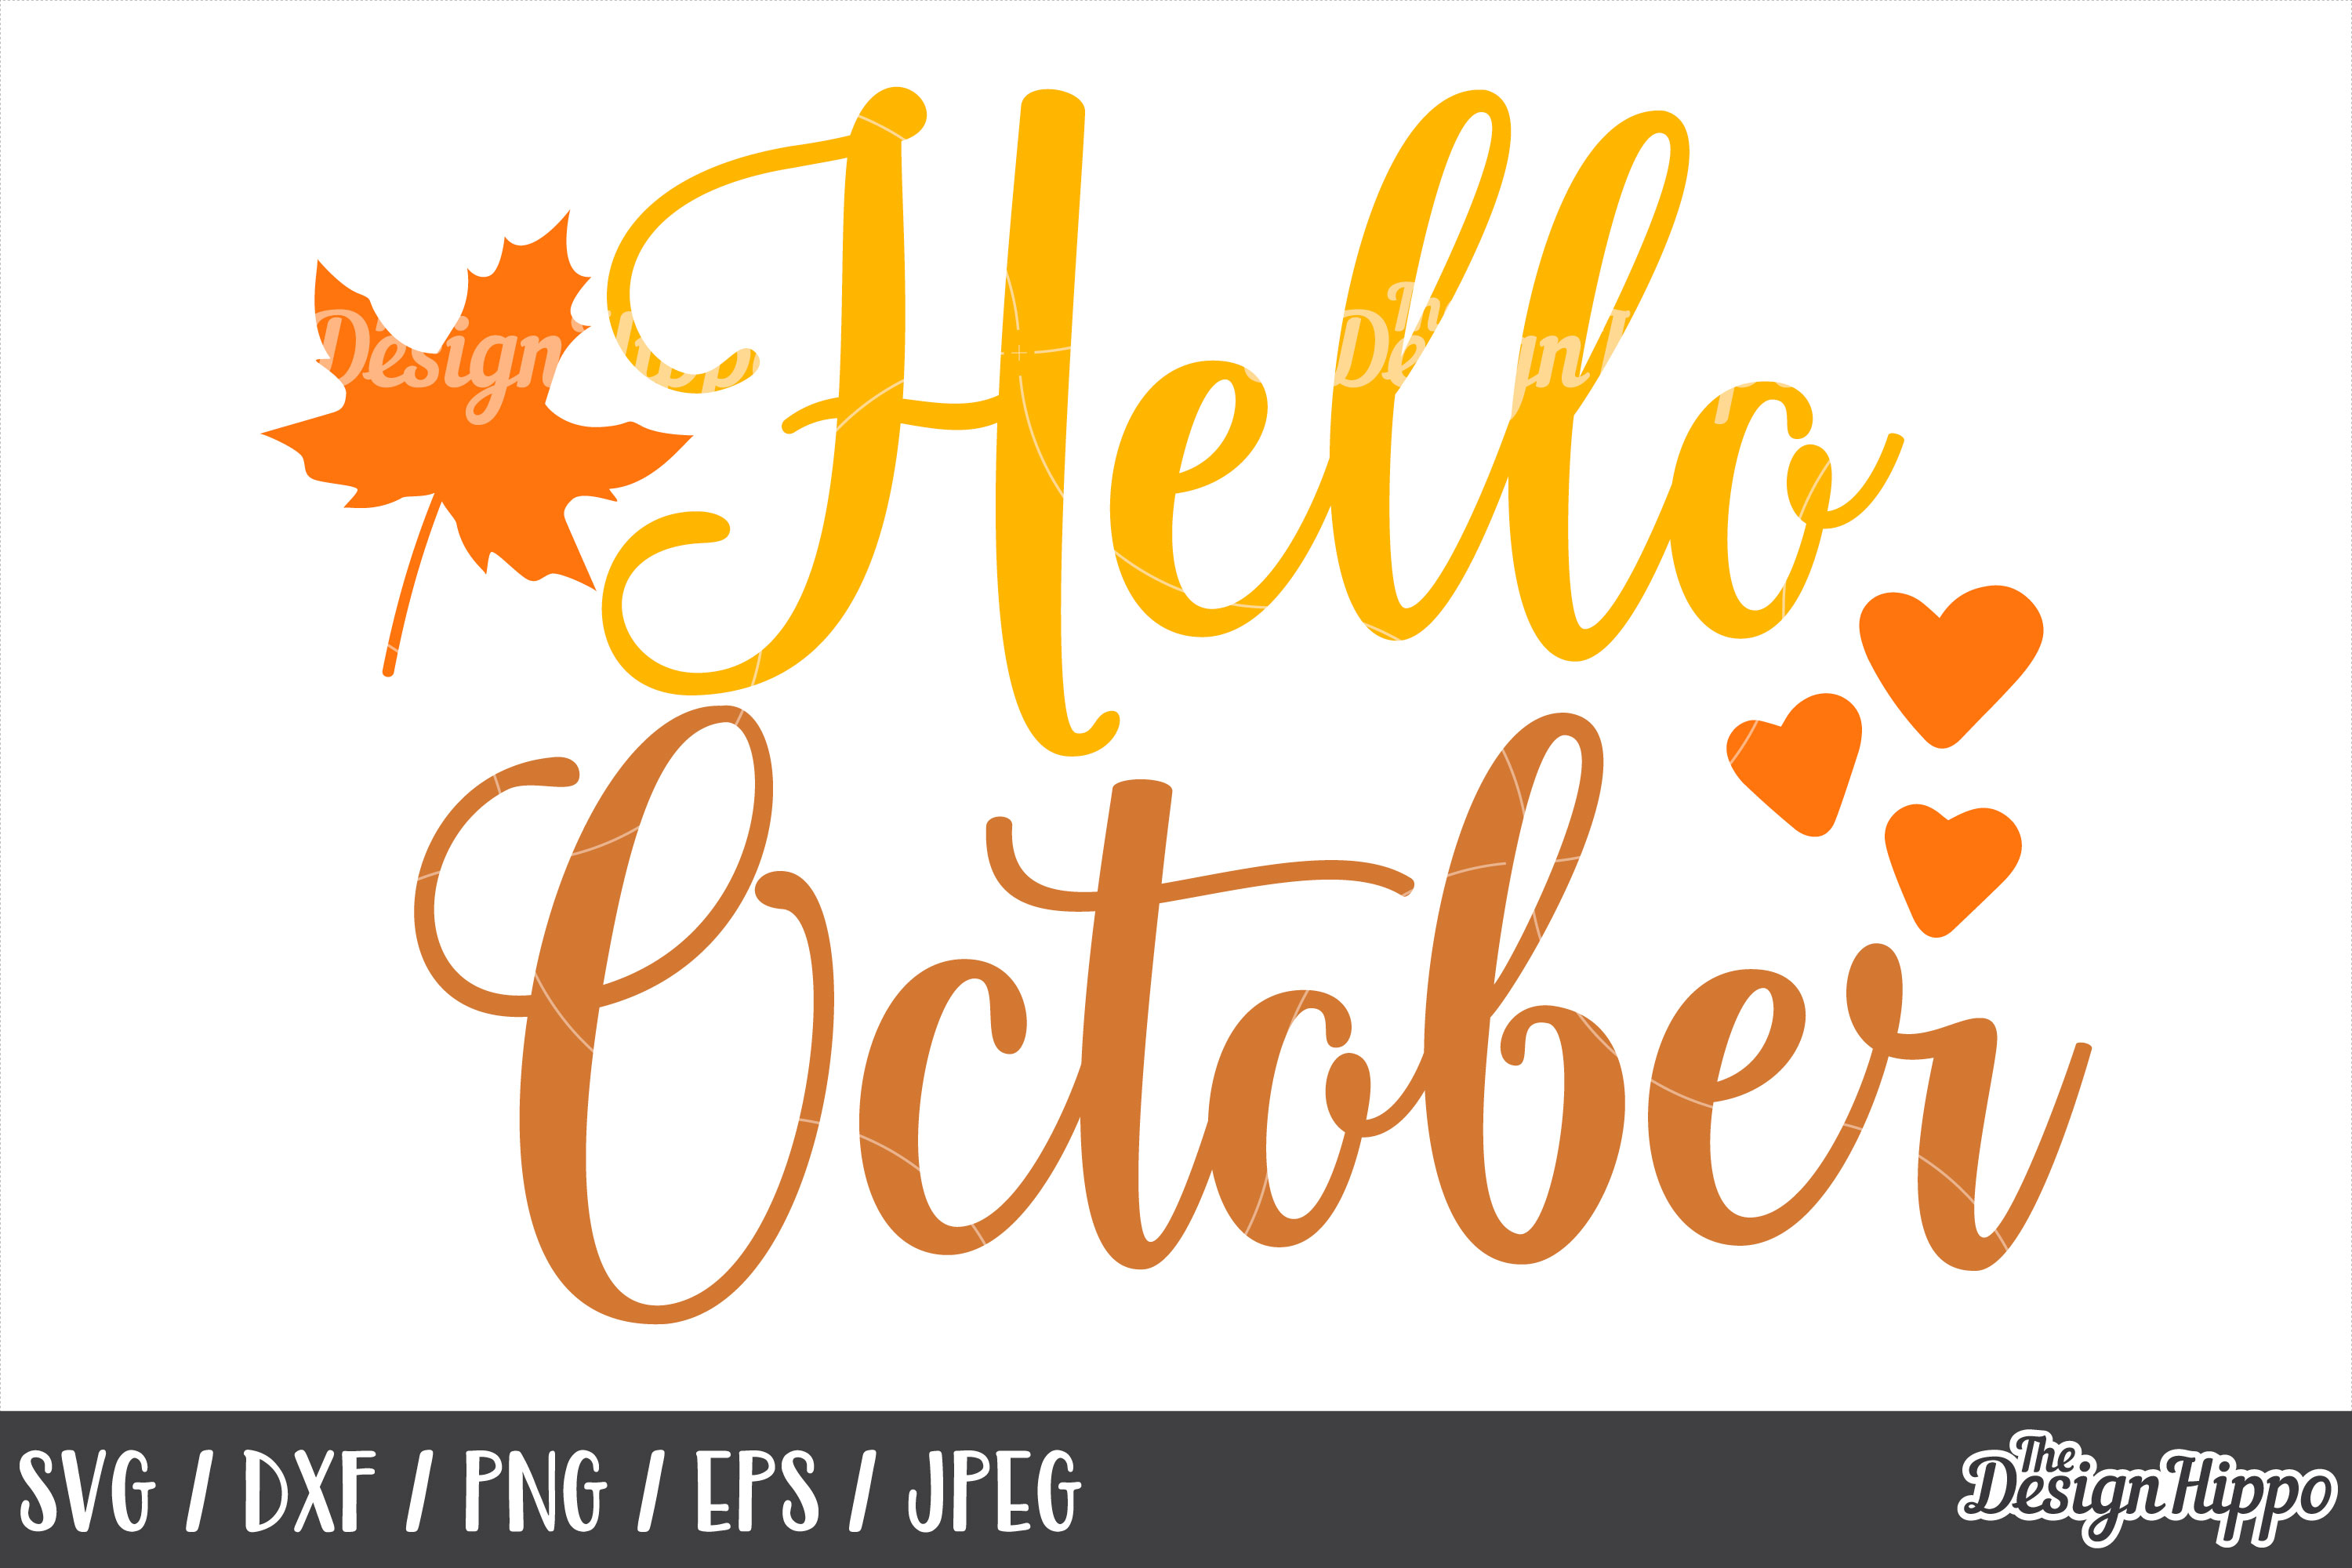 Feeling love in october. I Love October картинки. Hello October PNG. Hello October ЗТП. Hello Fall полоска.